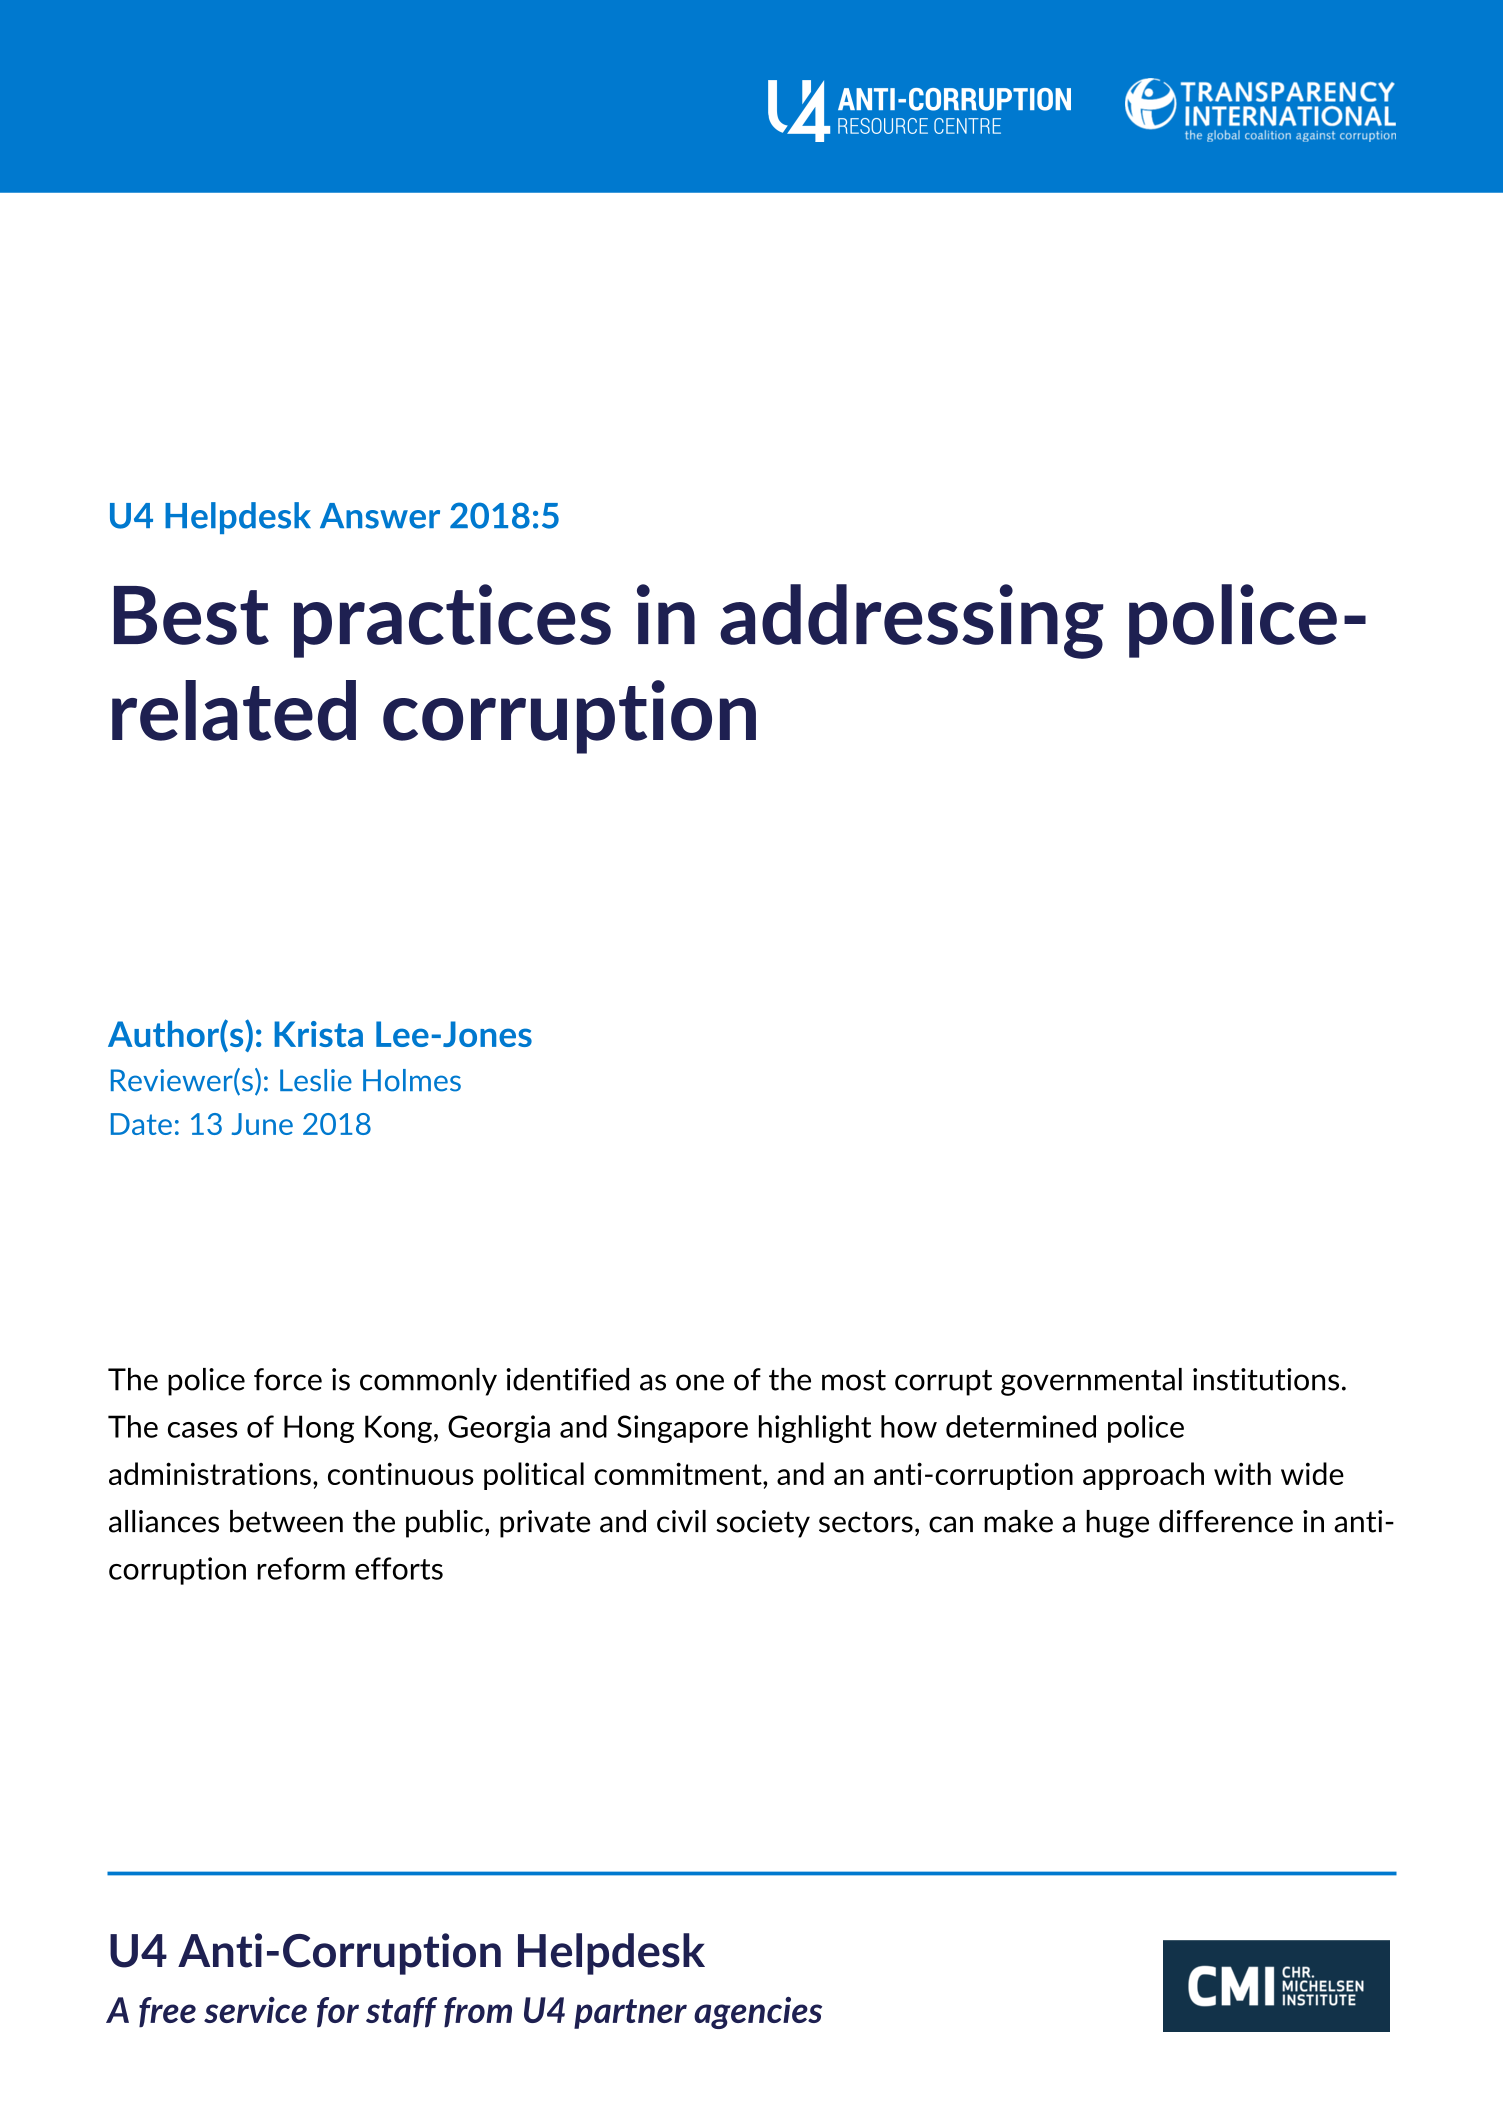 Best practices in addressing police-related corruption